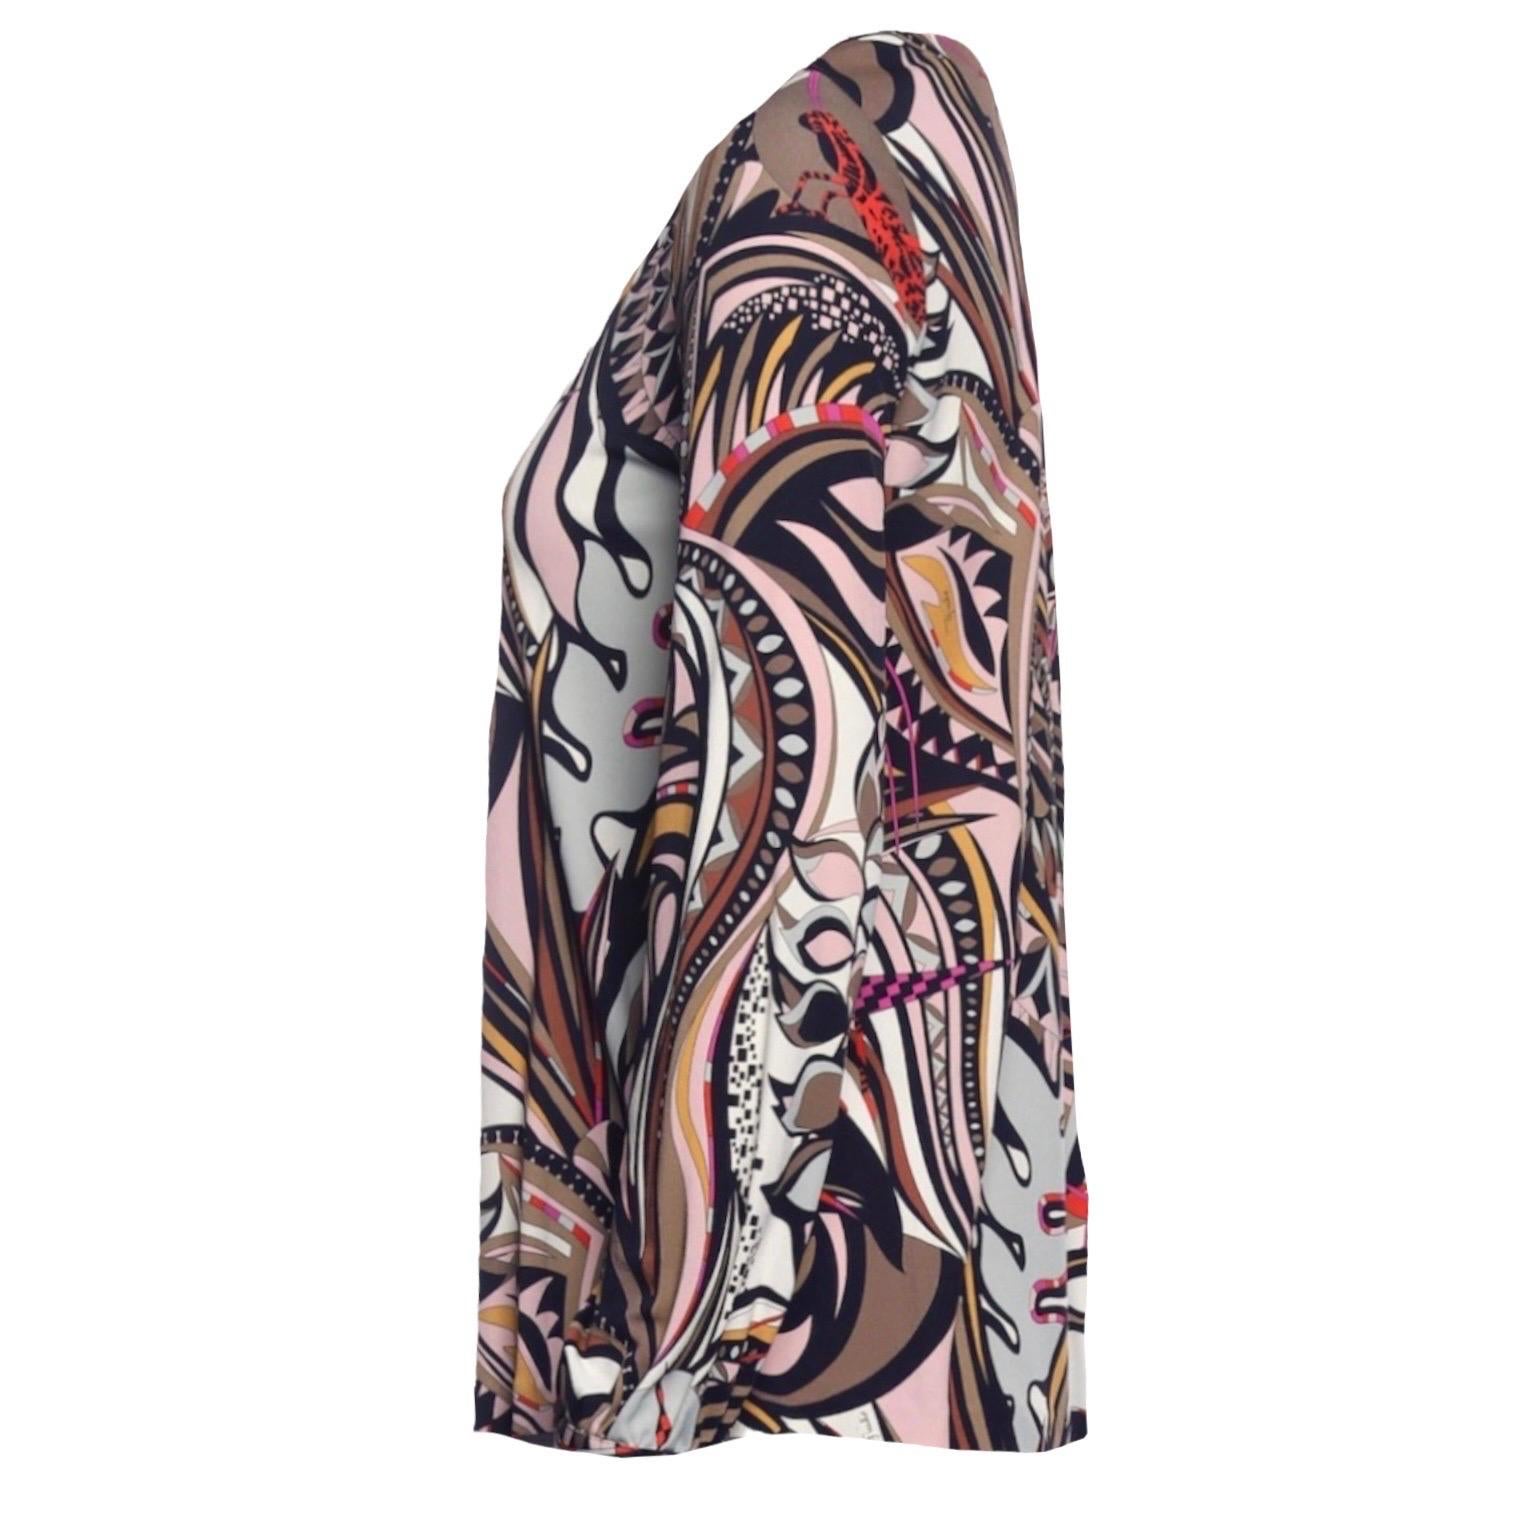 This Emilio Pucci's blouse is printed with the brand's signature print and logo. 
